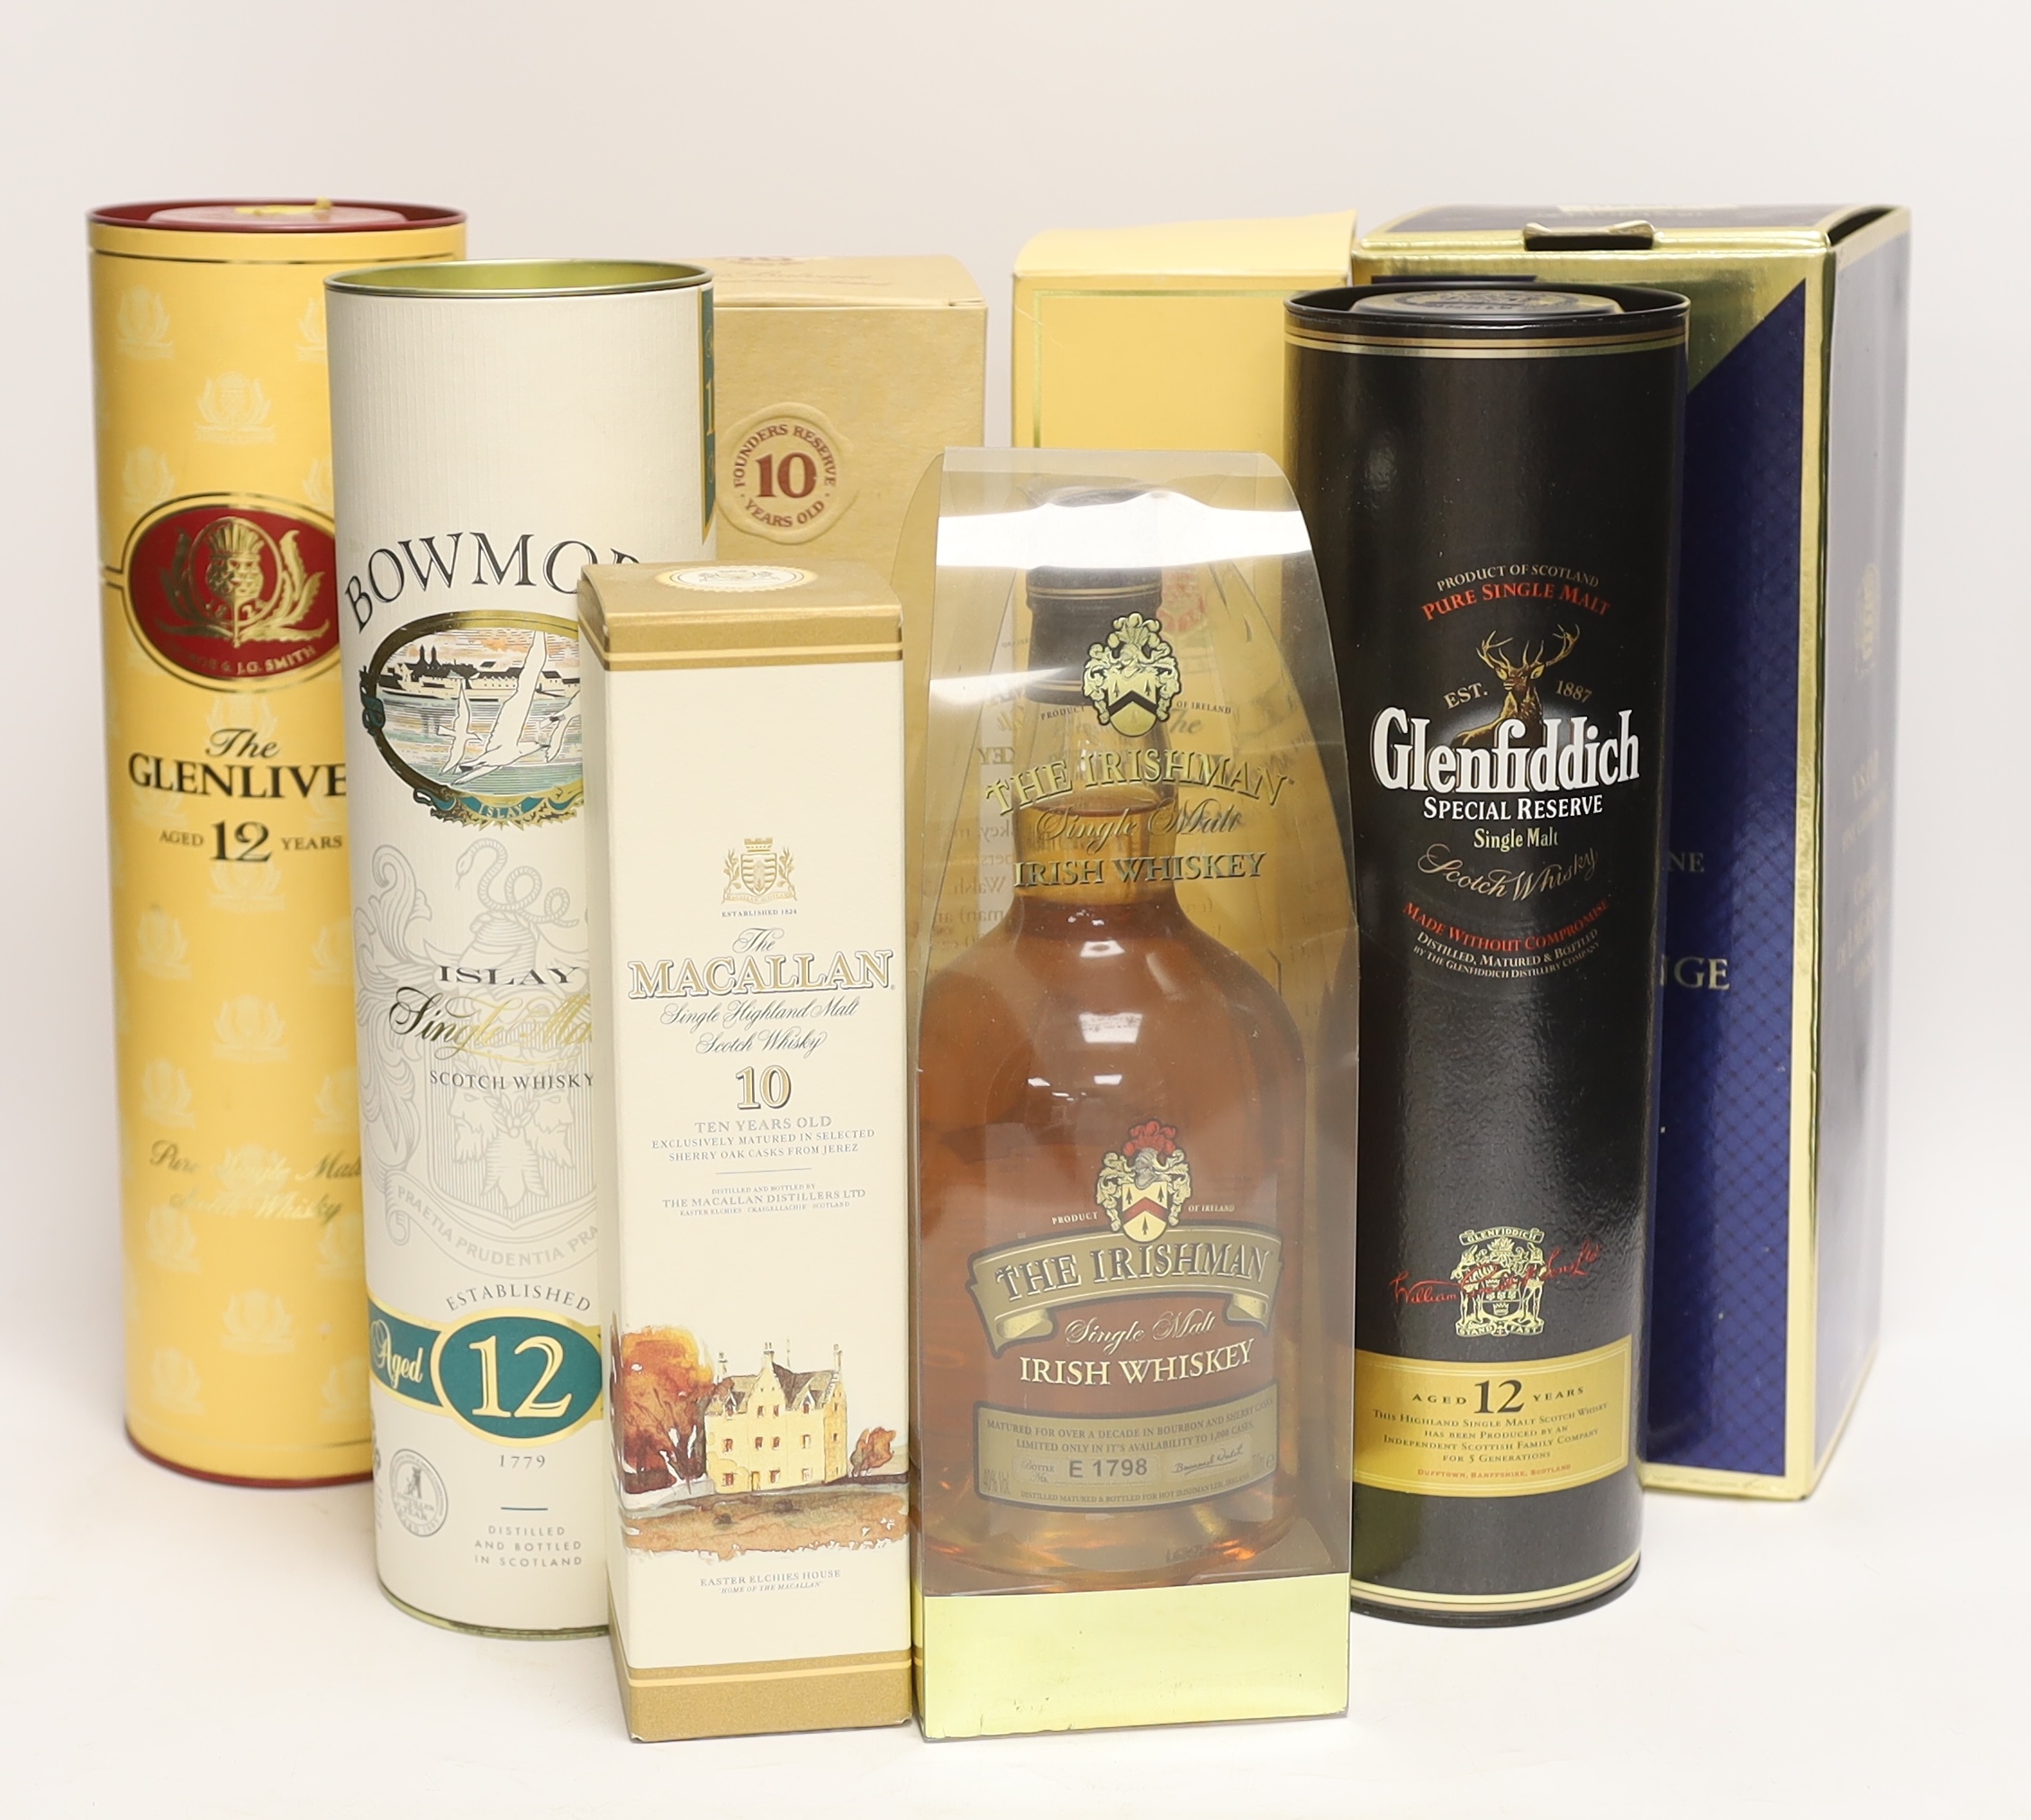 Eight bottles of Whisky, Whiskey and Cognac to include a 70cl bottle of The Balvenie Founders Reserve 10 Year Scotch, Glenlivet 12 year x2, Bowmore 12 year, Glenfiddich Special Reserve 12 year, The Irishman single malt I